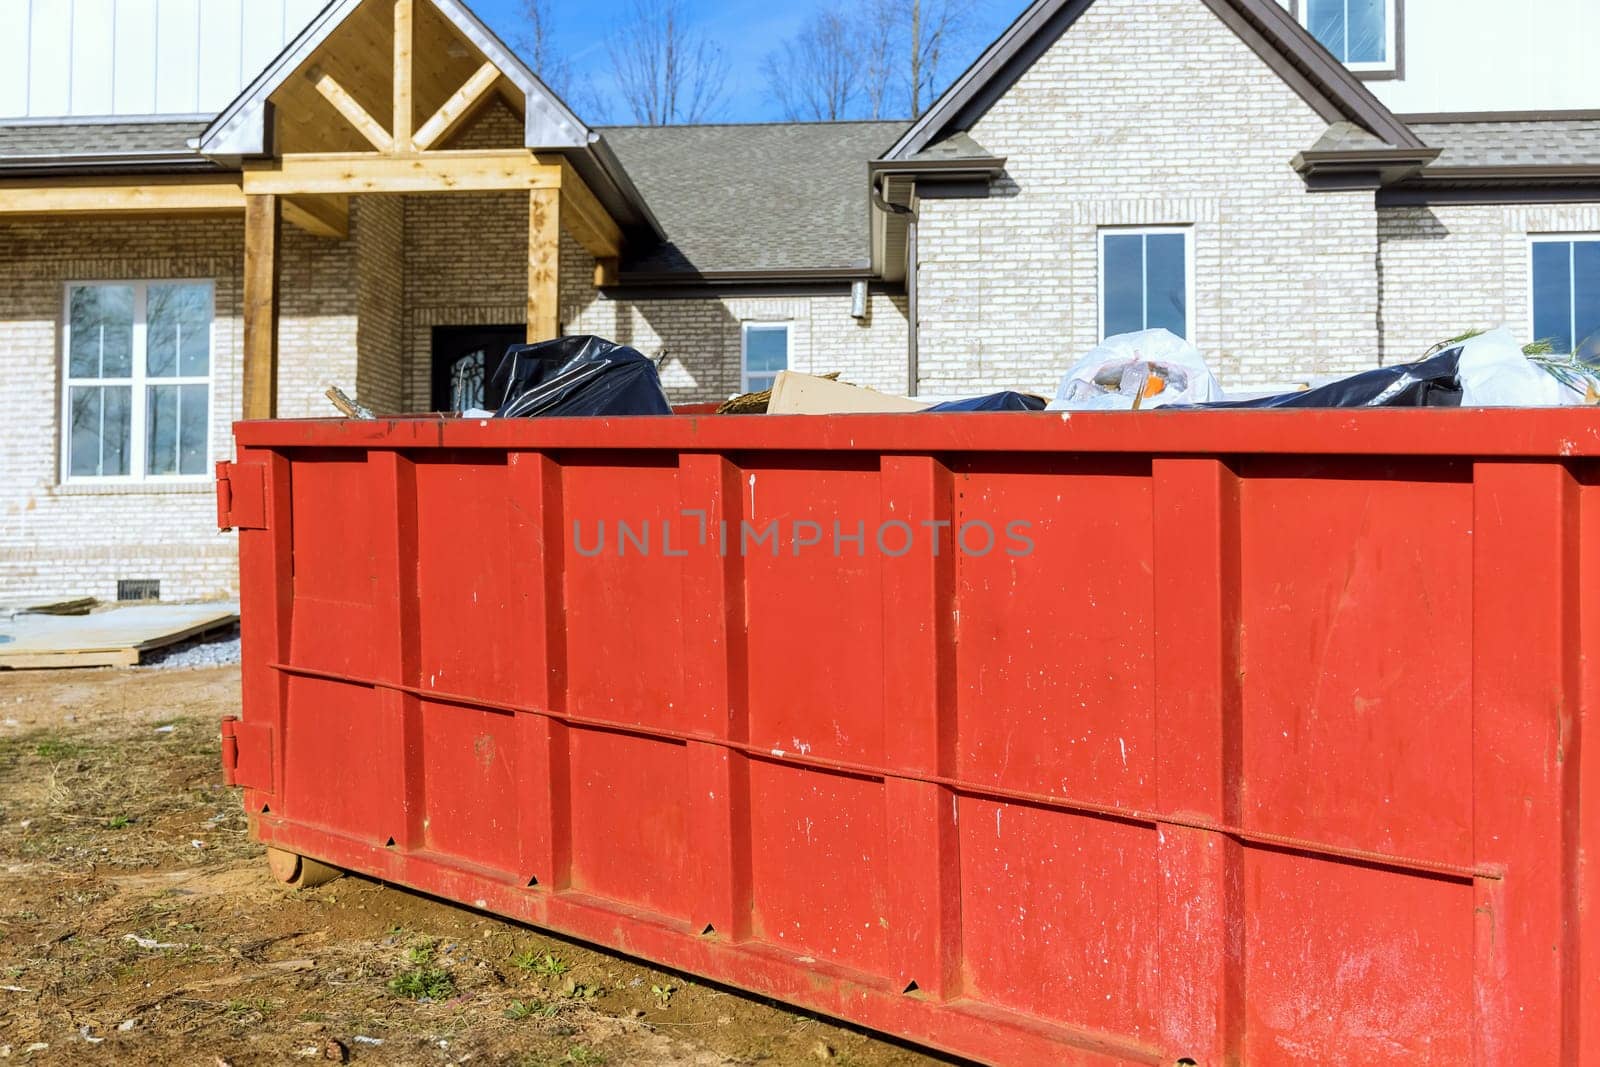 Container trash dumpster for construction waste recycling with care to a environment by ungvar